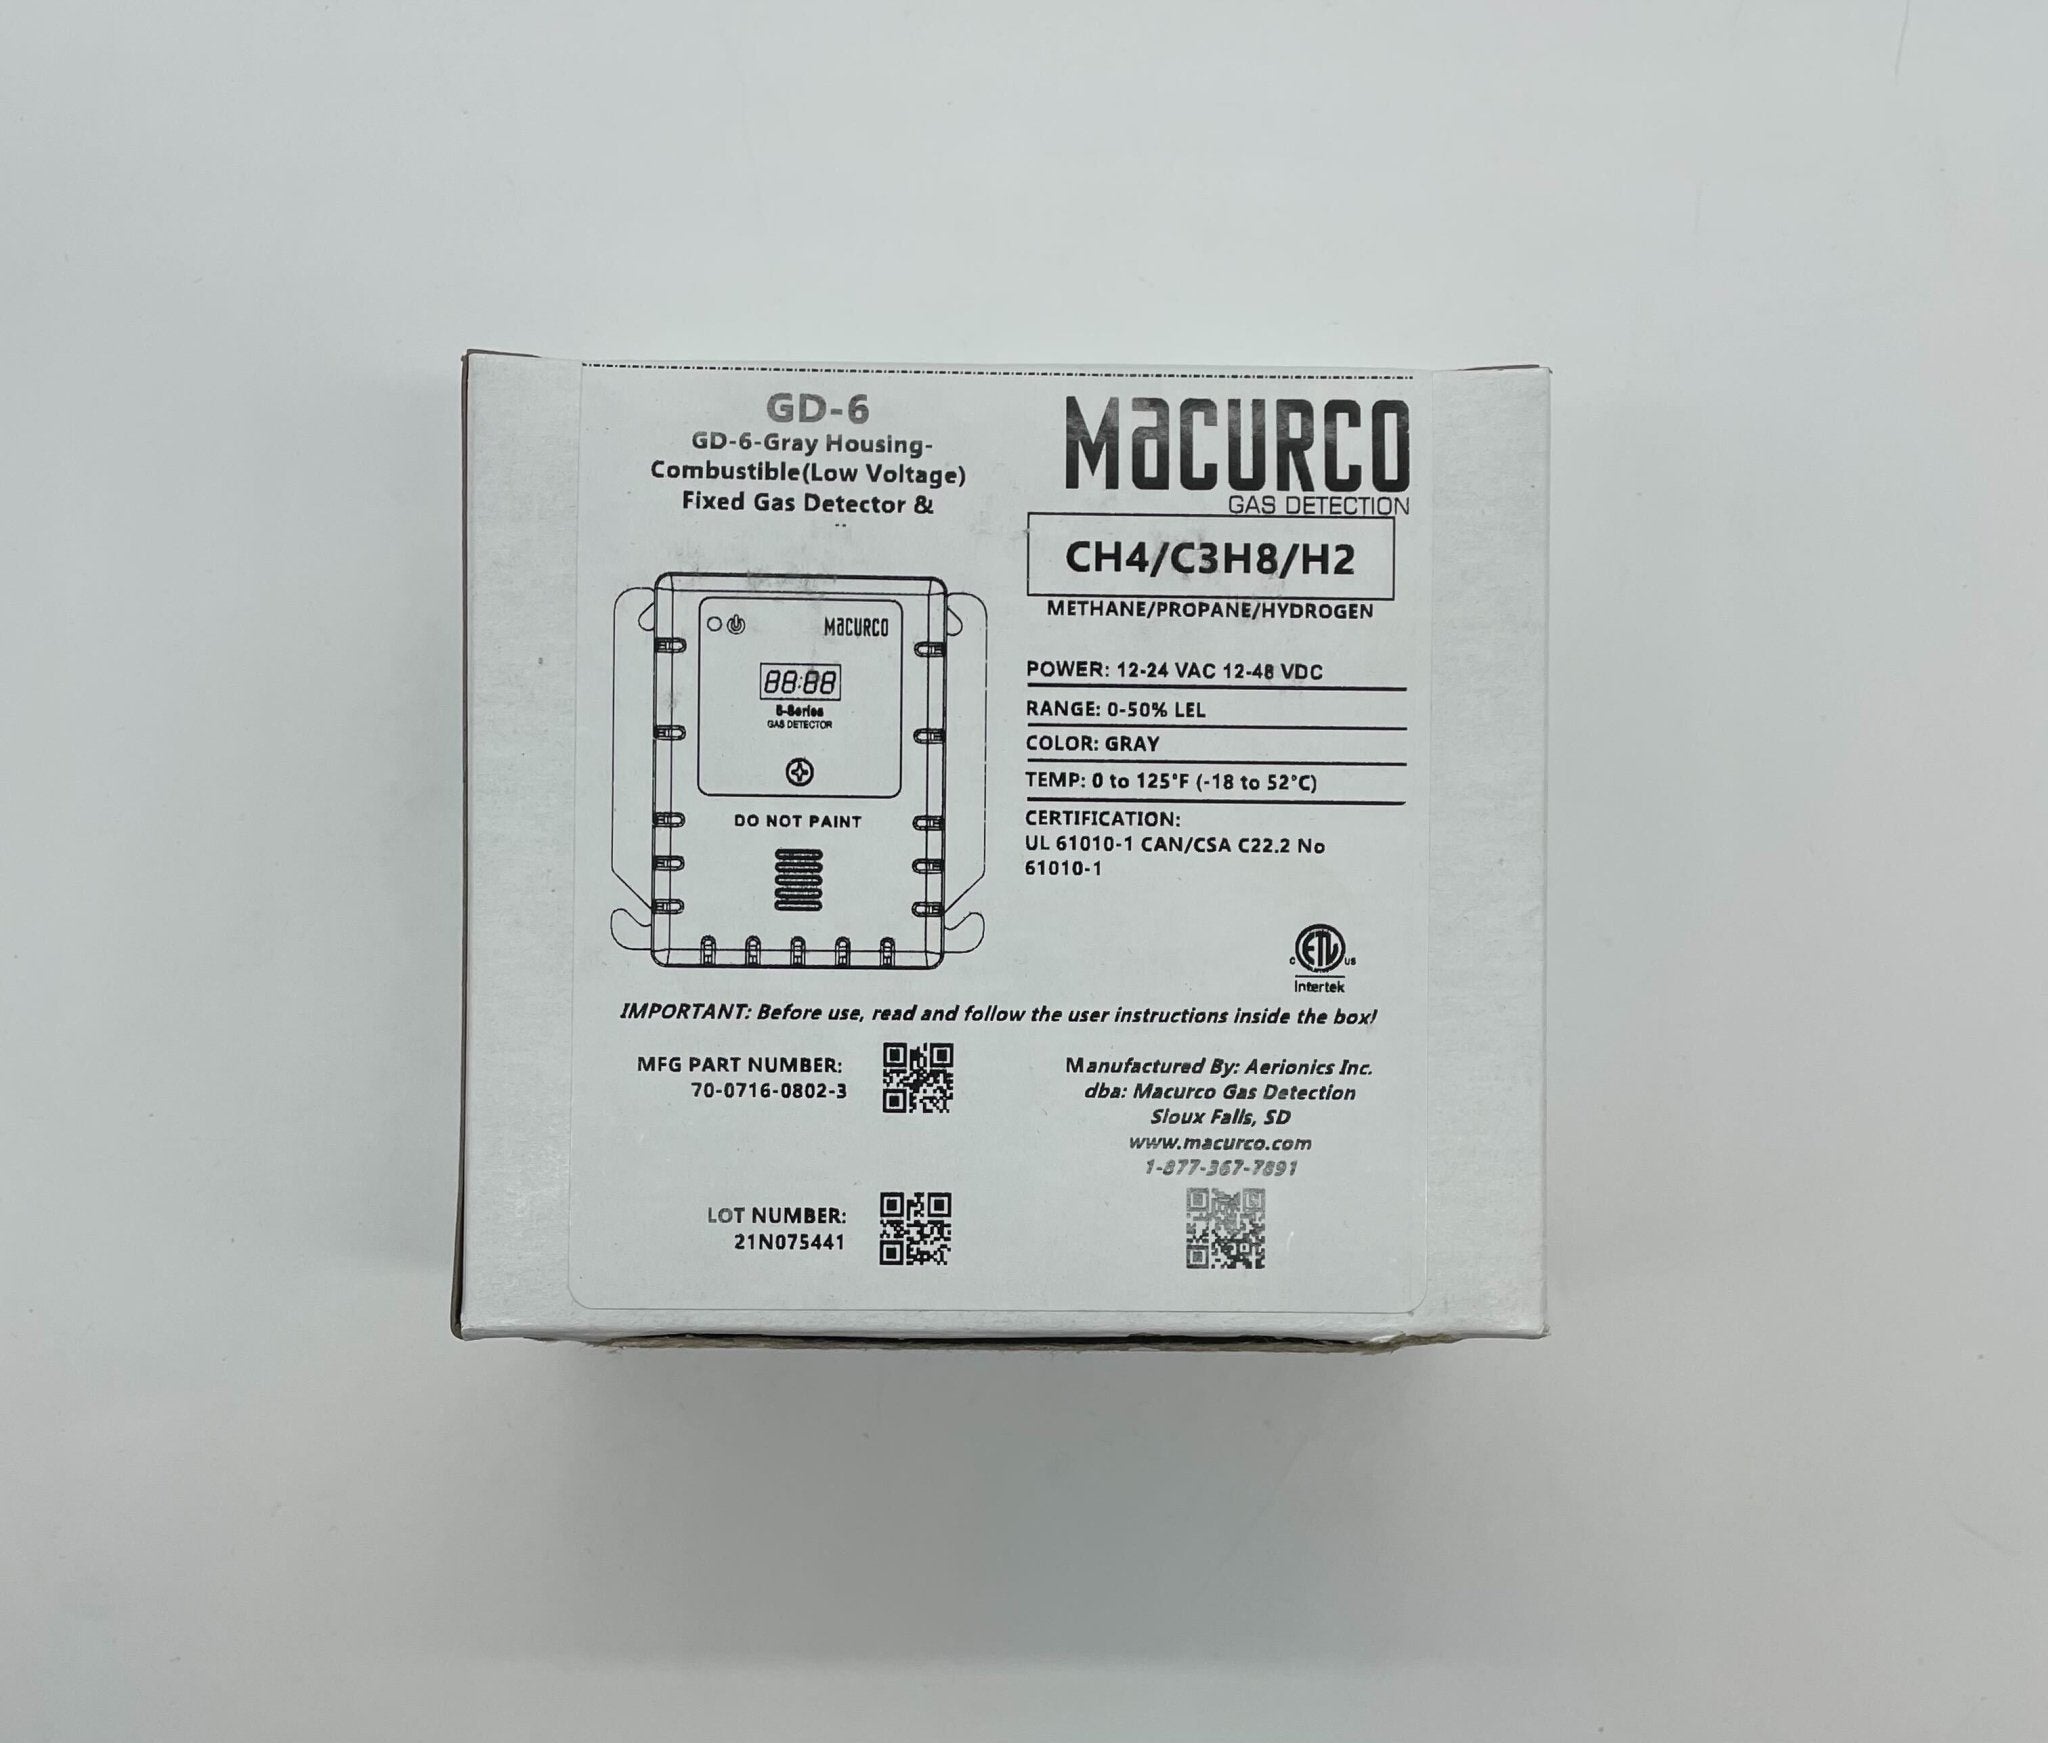 Macurco GD-6 - The Fire Alarm Supplier